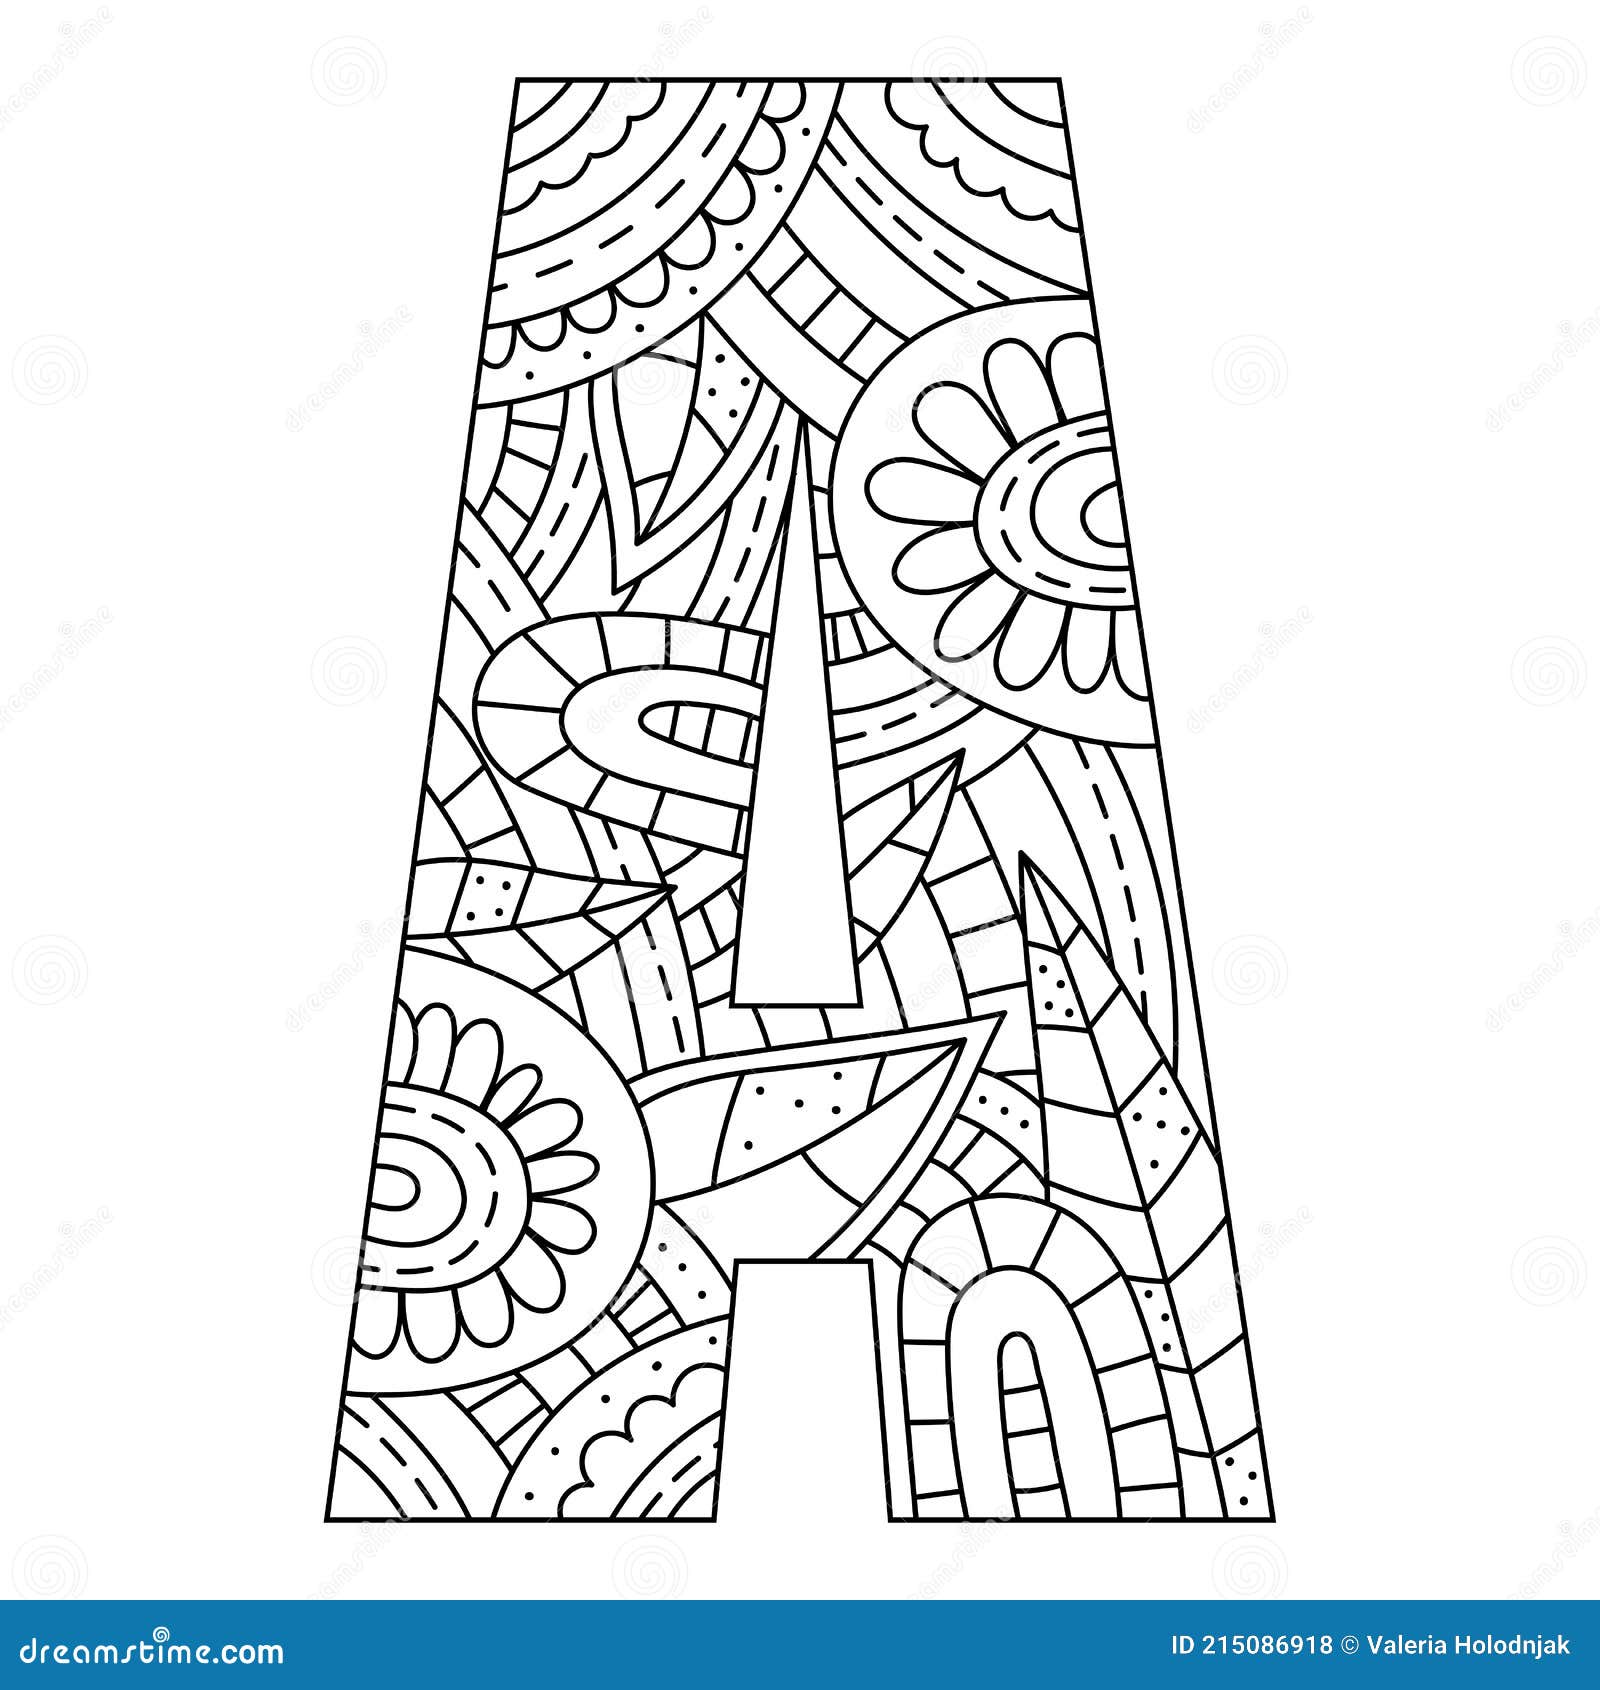 Alphabet Coloring Page. Capital Letter. Vector Illustration. Stock ...